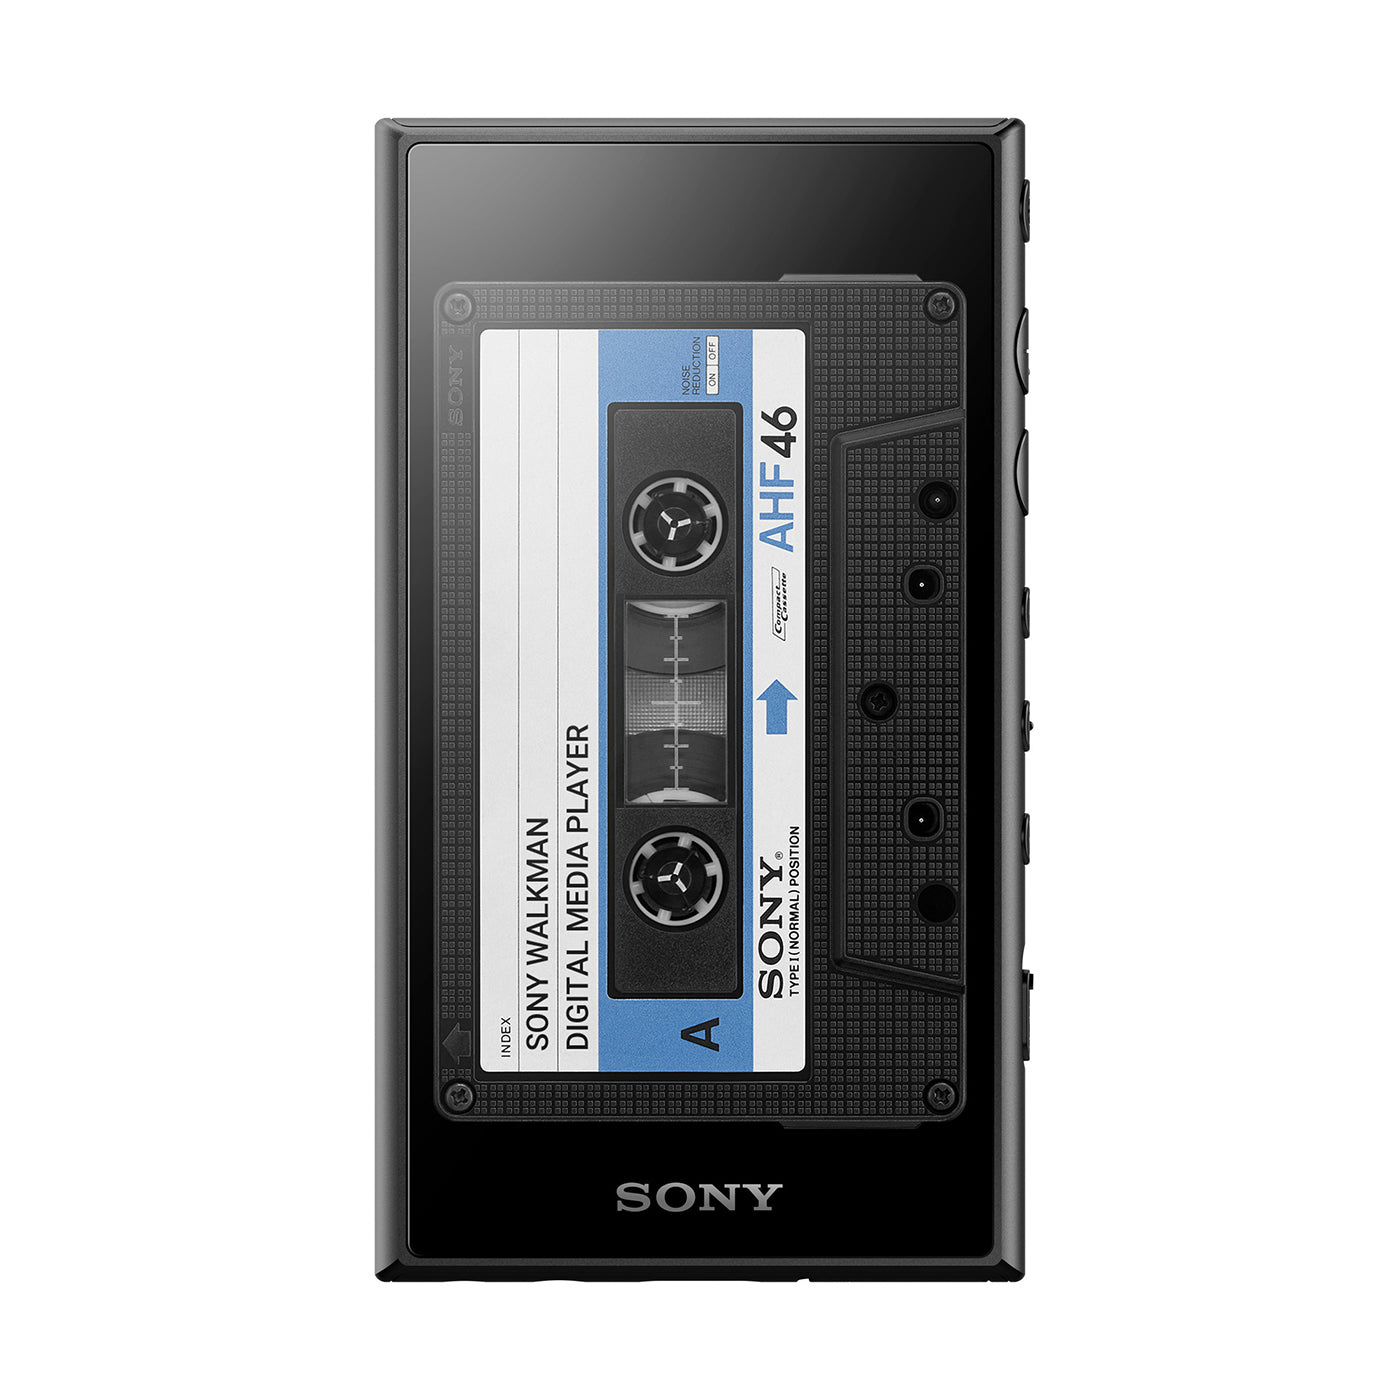 Sony Nw-A105 16GB Walkman Hi-Res Portable Digital Music Player with Android 9.0 Wi-Fi